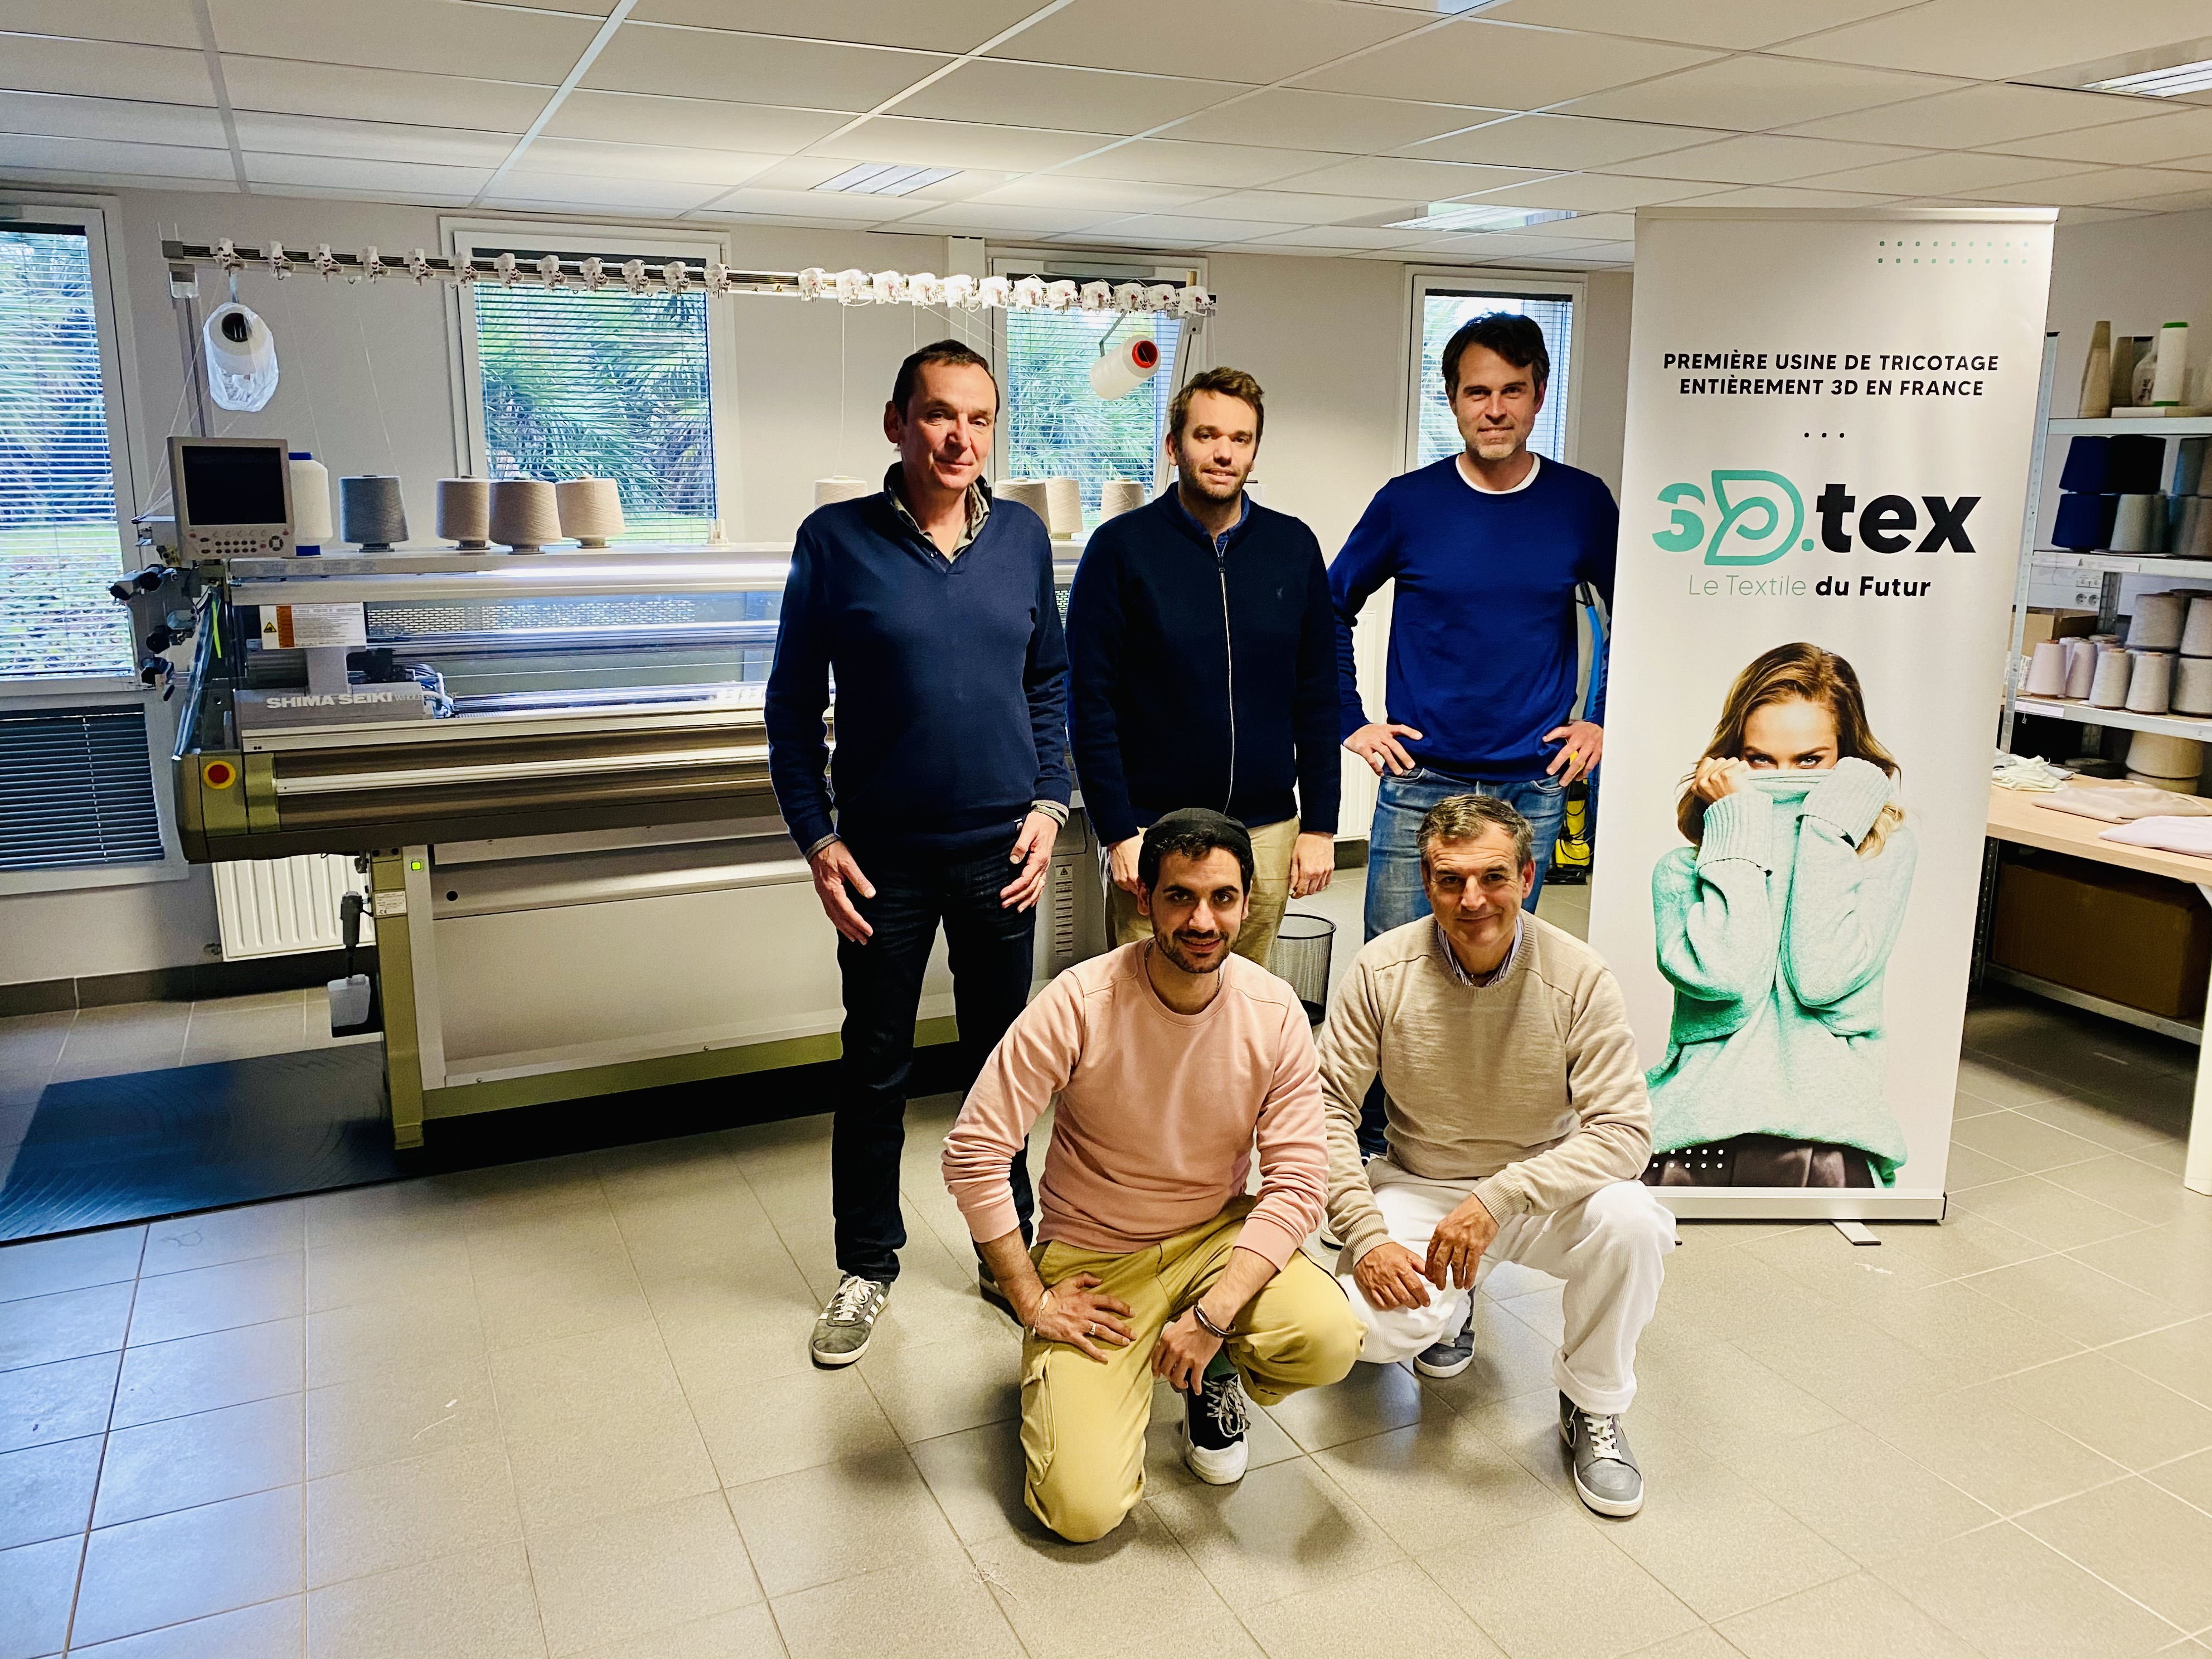 The 3D-TEX team are ready for a June 2021 launch. © 3D-TEX